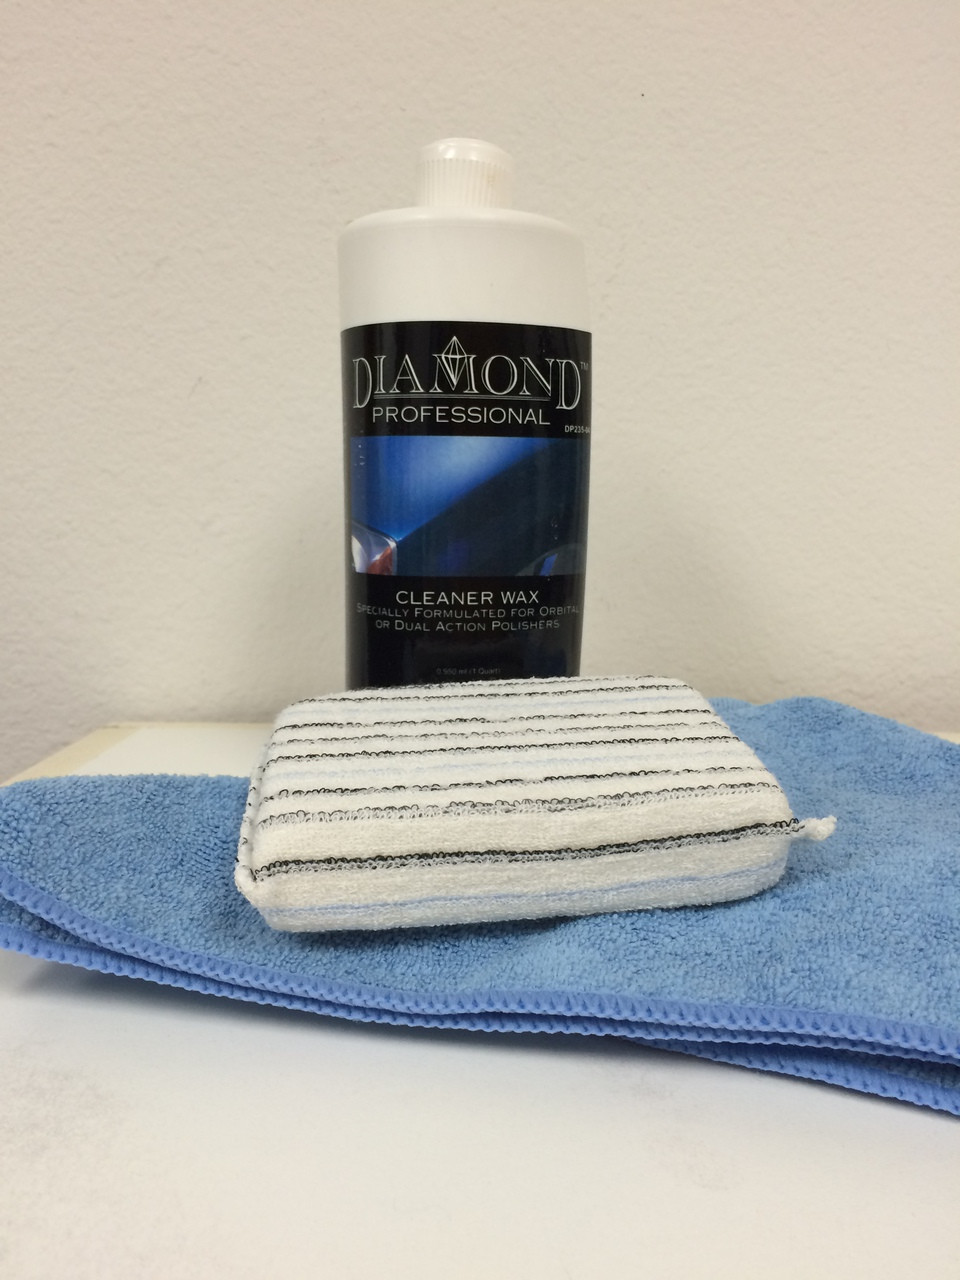 This kit includes Cleaner Wax, 2 mircrofiber towels, and an applicator sponge.